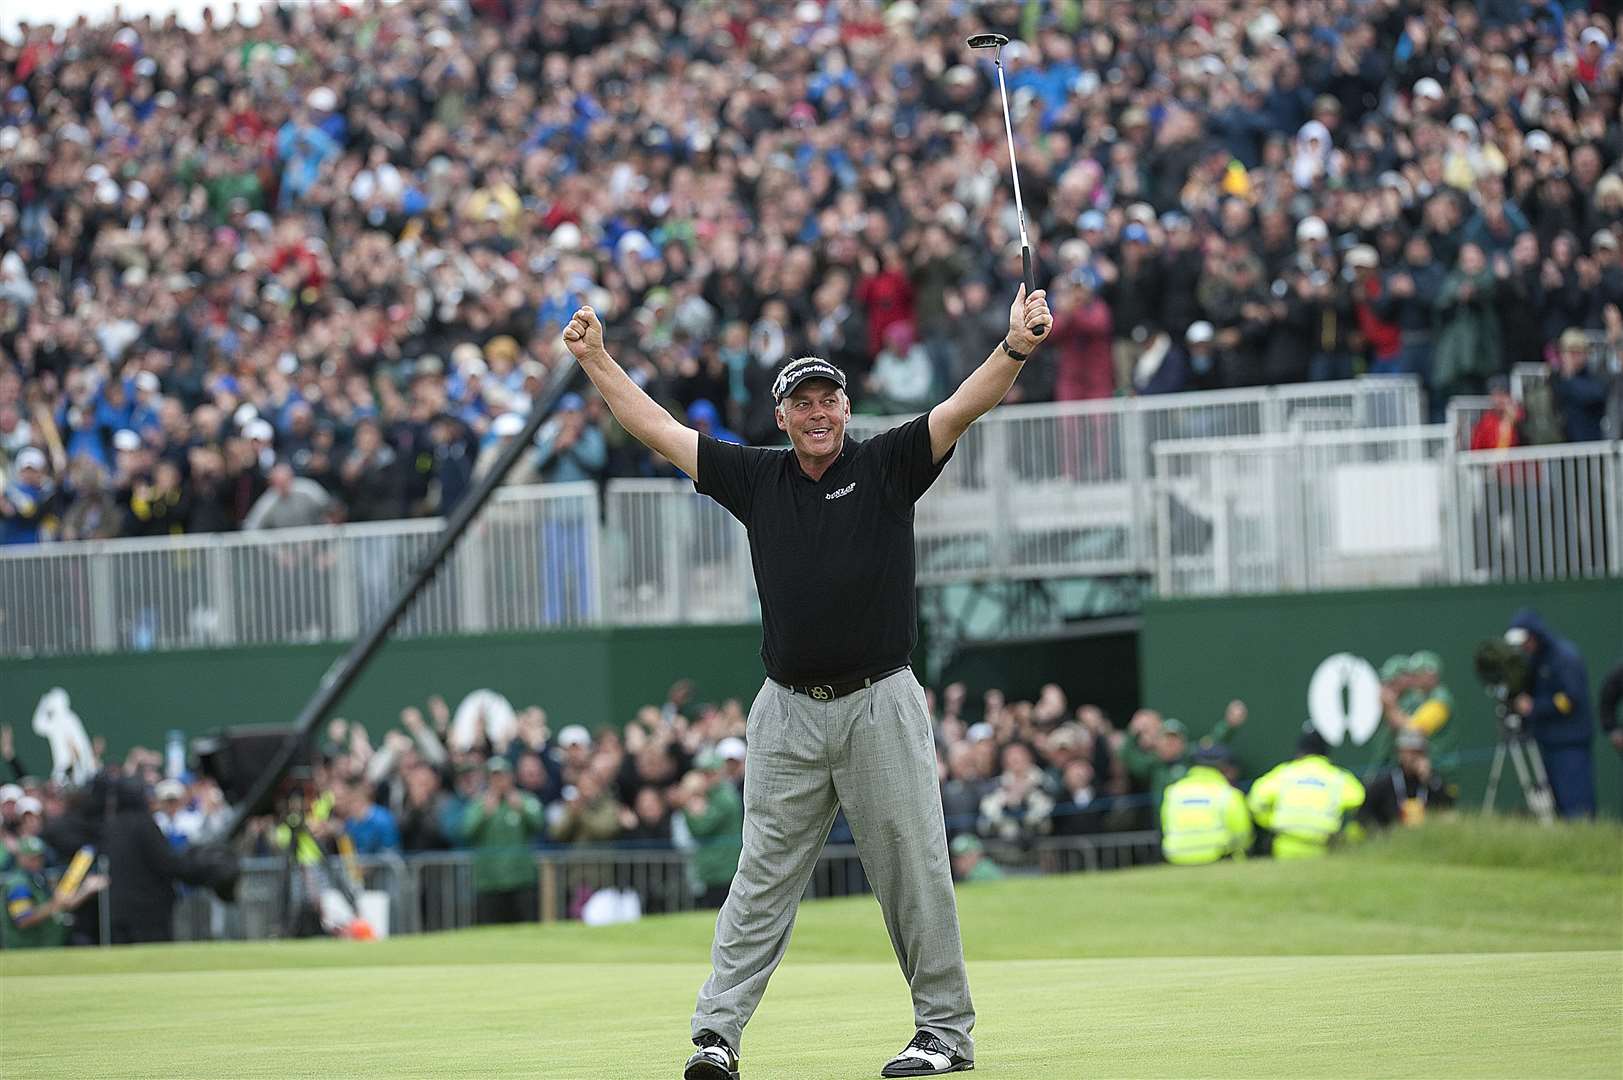 Darren Clarke wins The Open at Royal St George's in 2011, watched by a packed gallery. Picture: Barry Goodwin